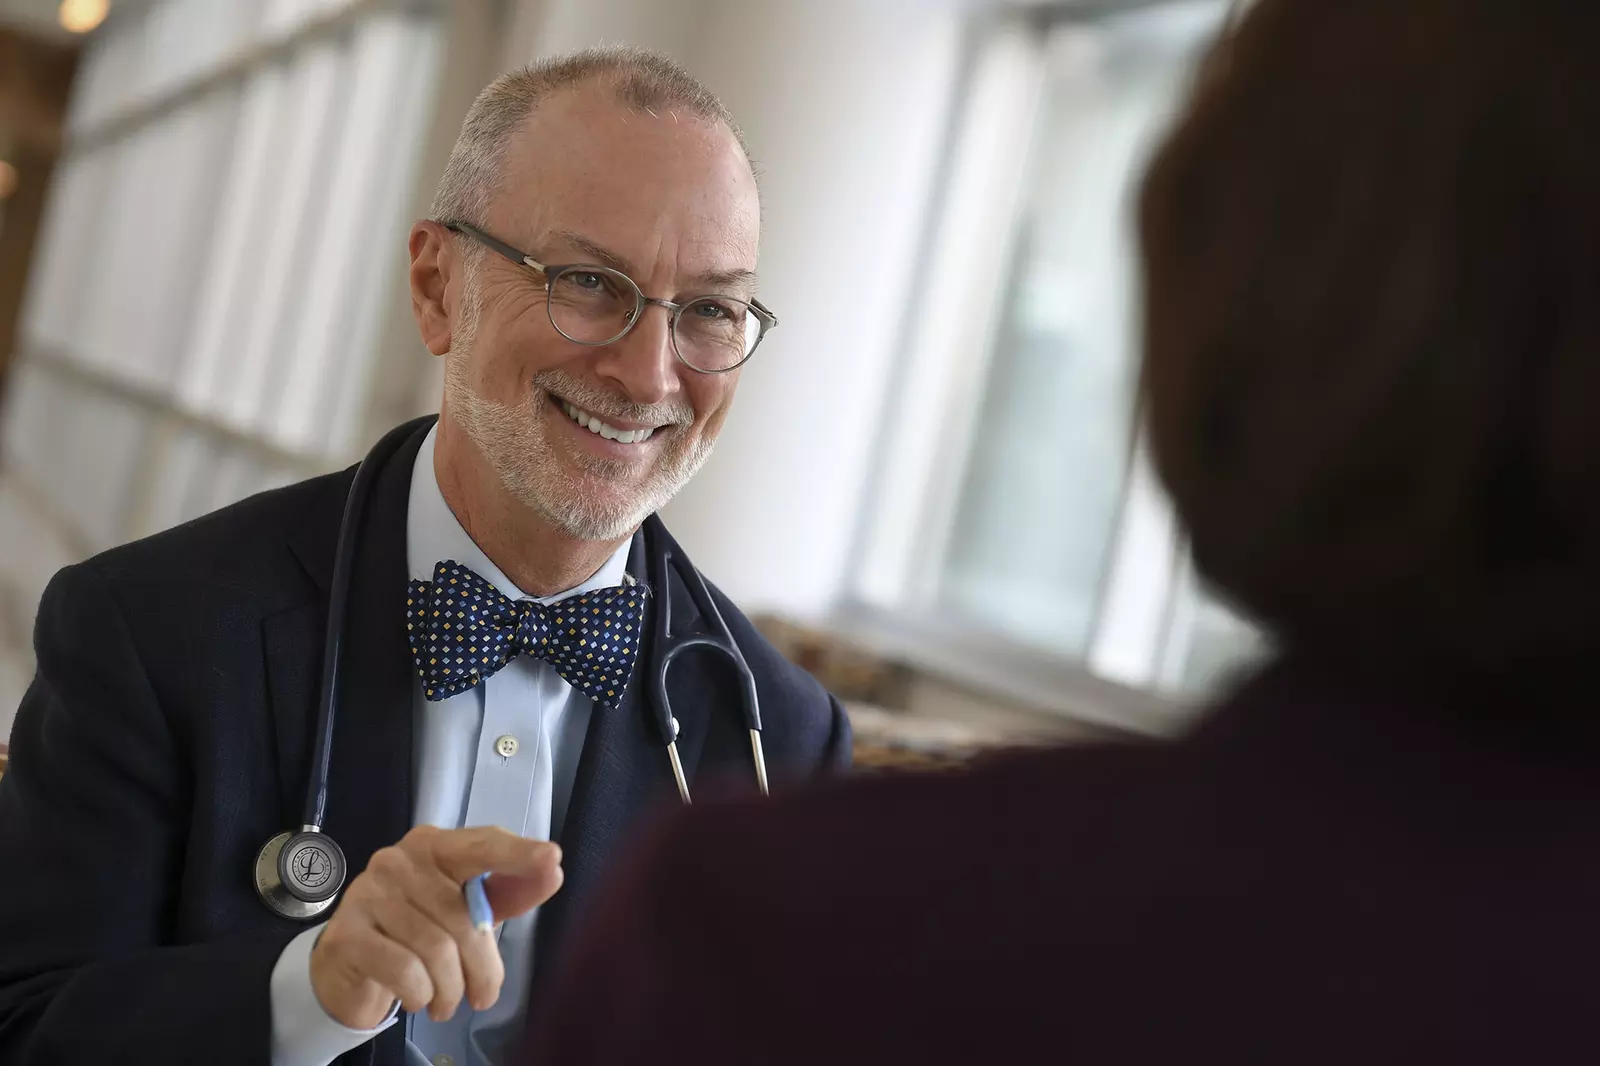 Steven R. Smith, M.D., is the chief scientific officer and senior vice president of AdventHealth.